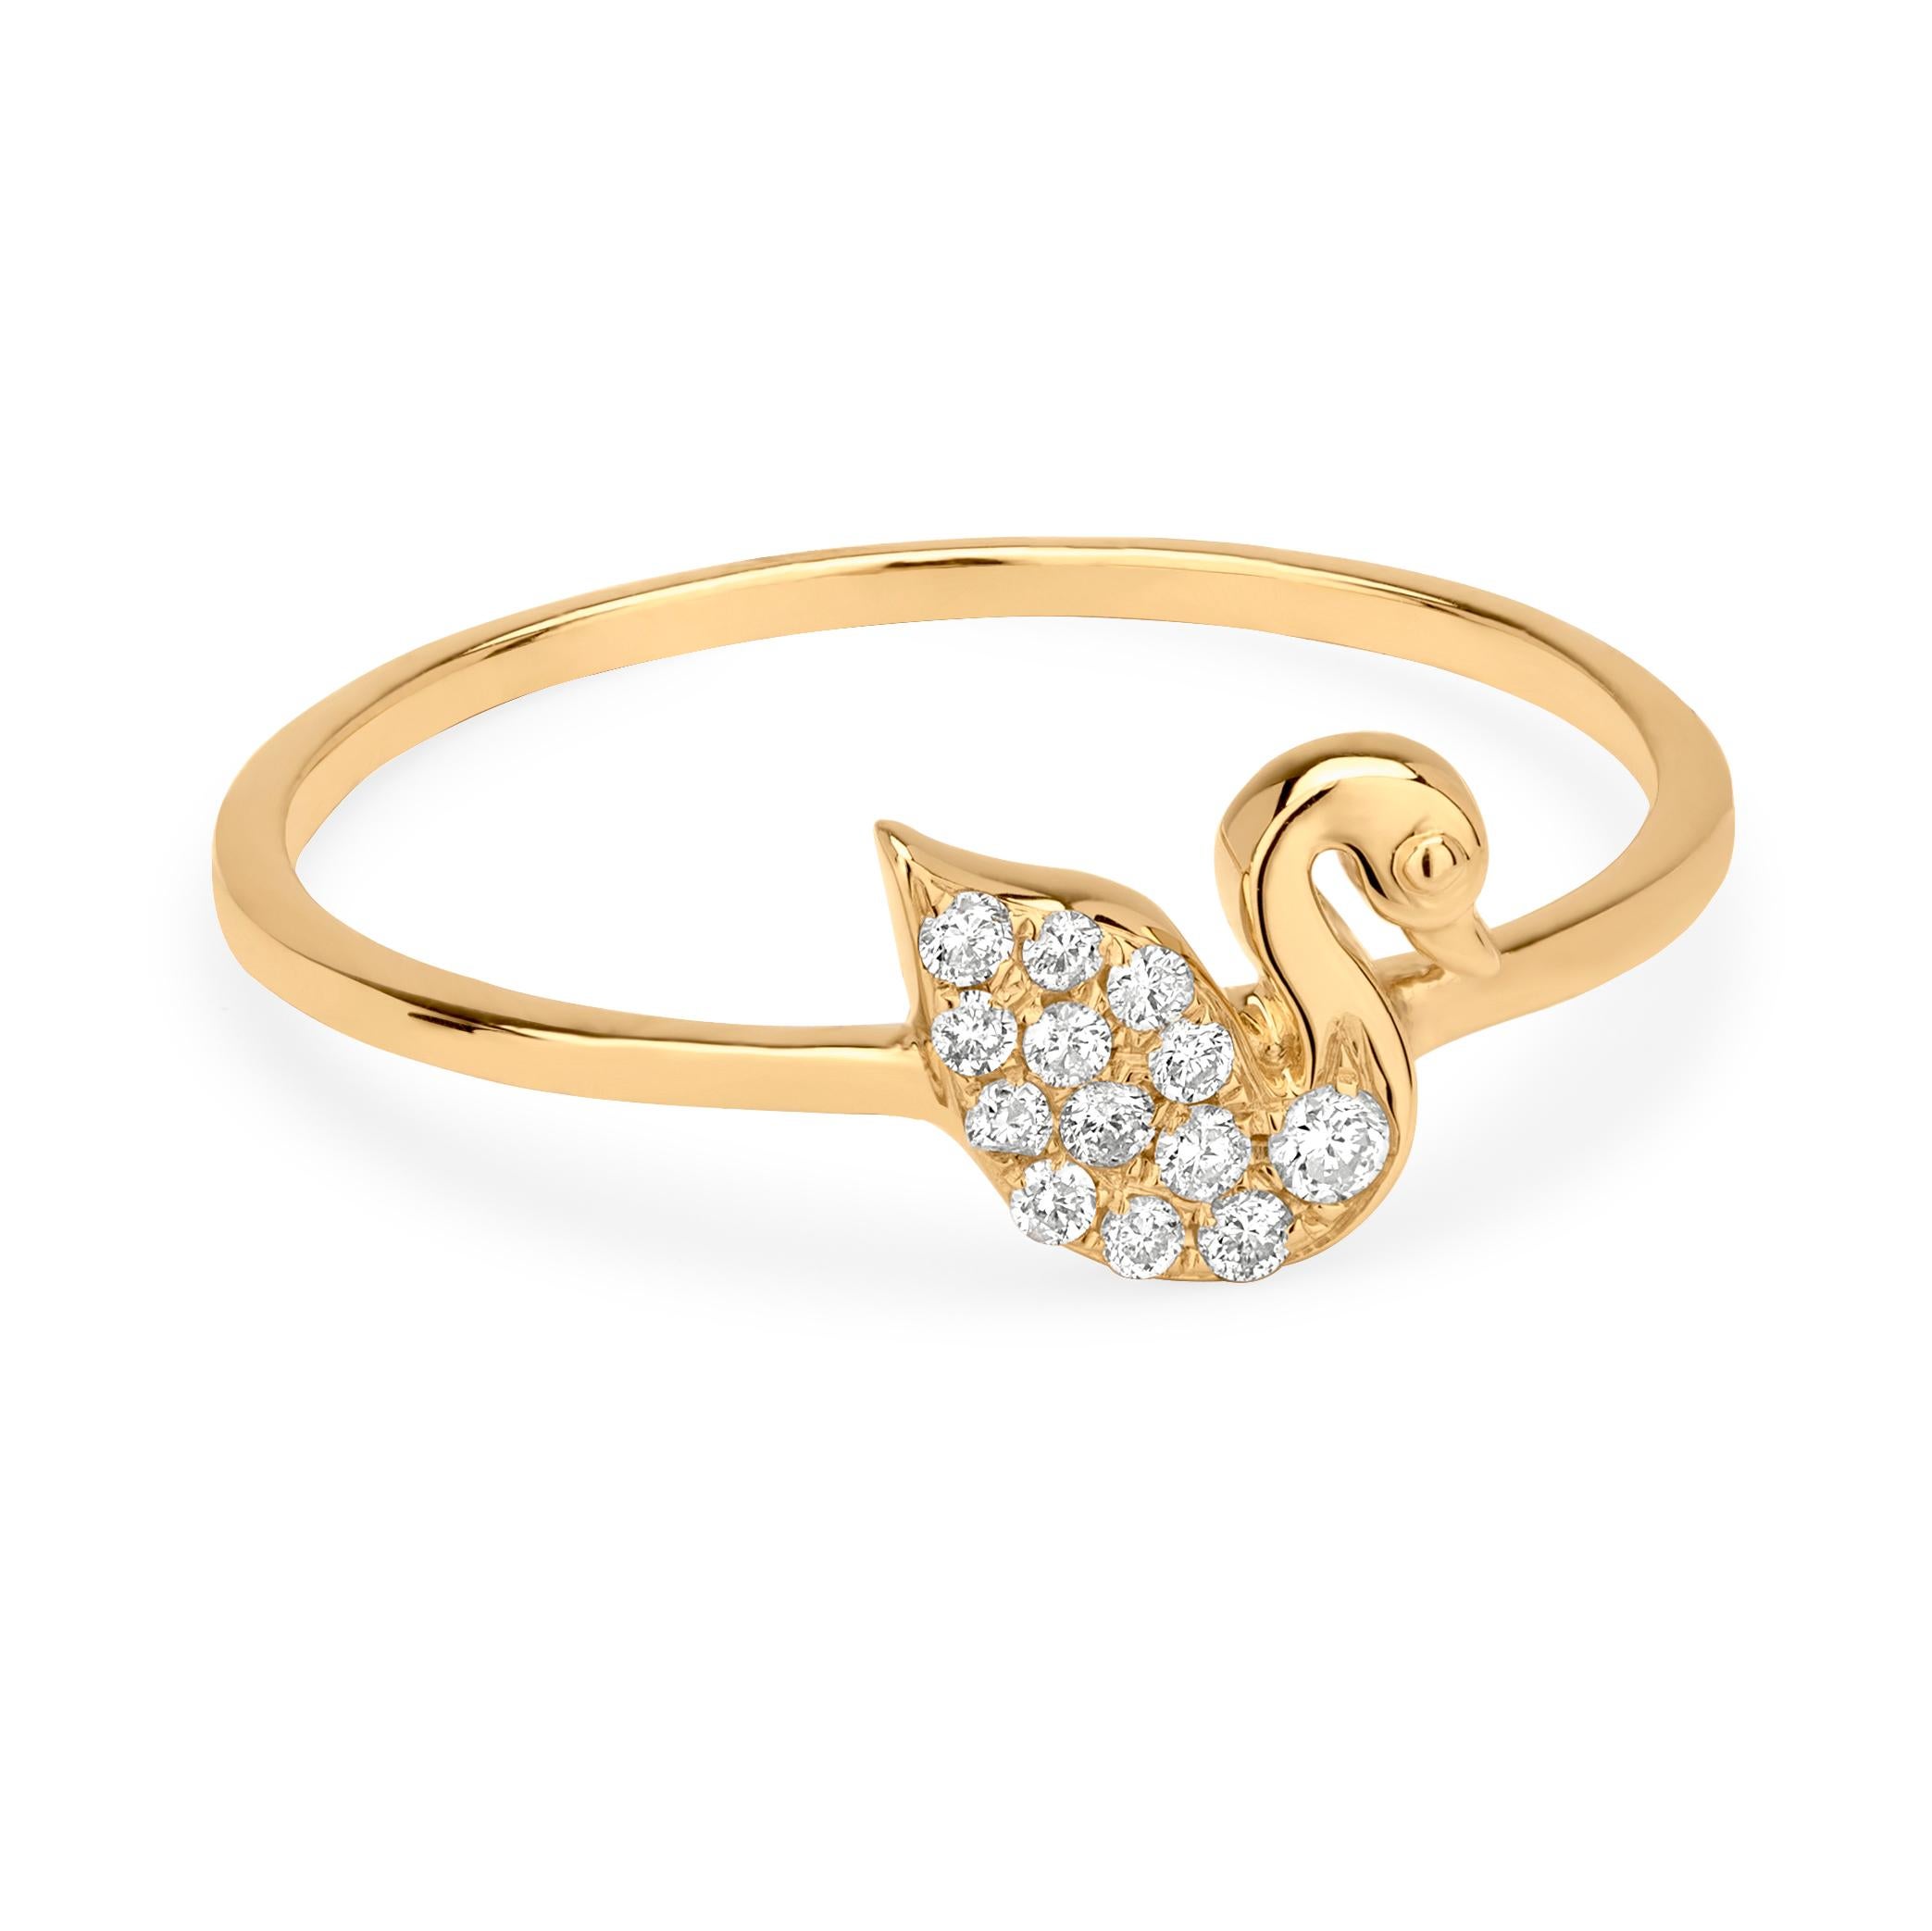 Grace your finger with a Luxle swan ring a symbol of fidelity and eternal love. Subtle yet pretty this swan ring is the new fashion statement. Featured with 13 round cut diamonds, totaling 0.25Cts, embellished in a beautifully crafted motif of swan